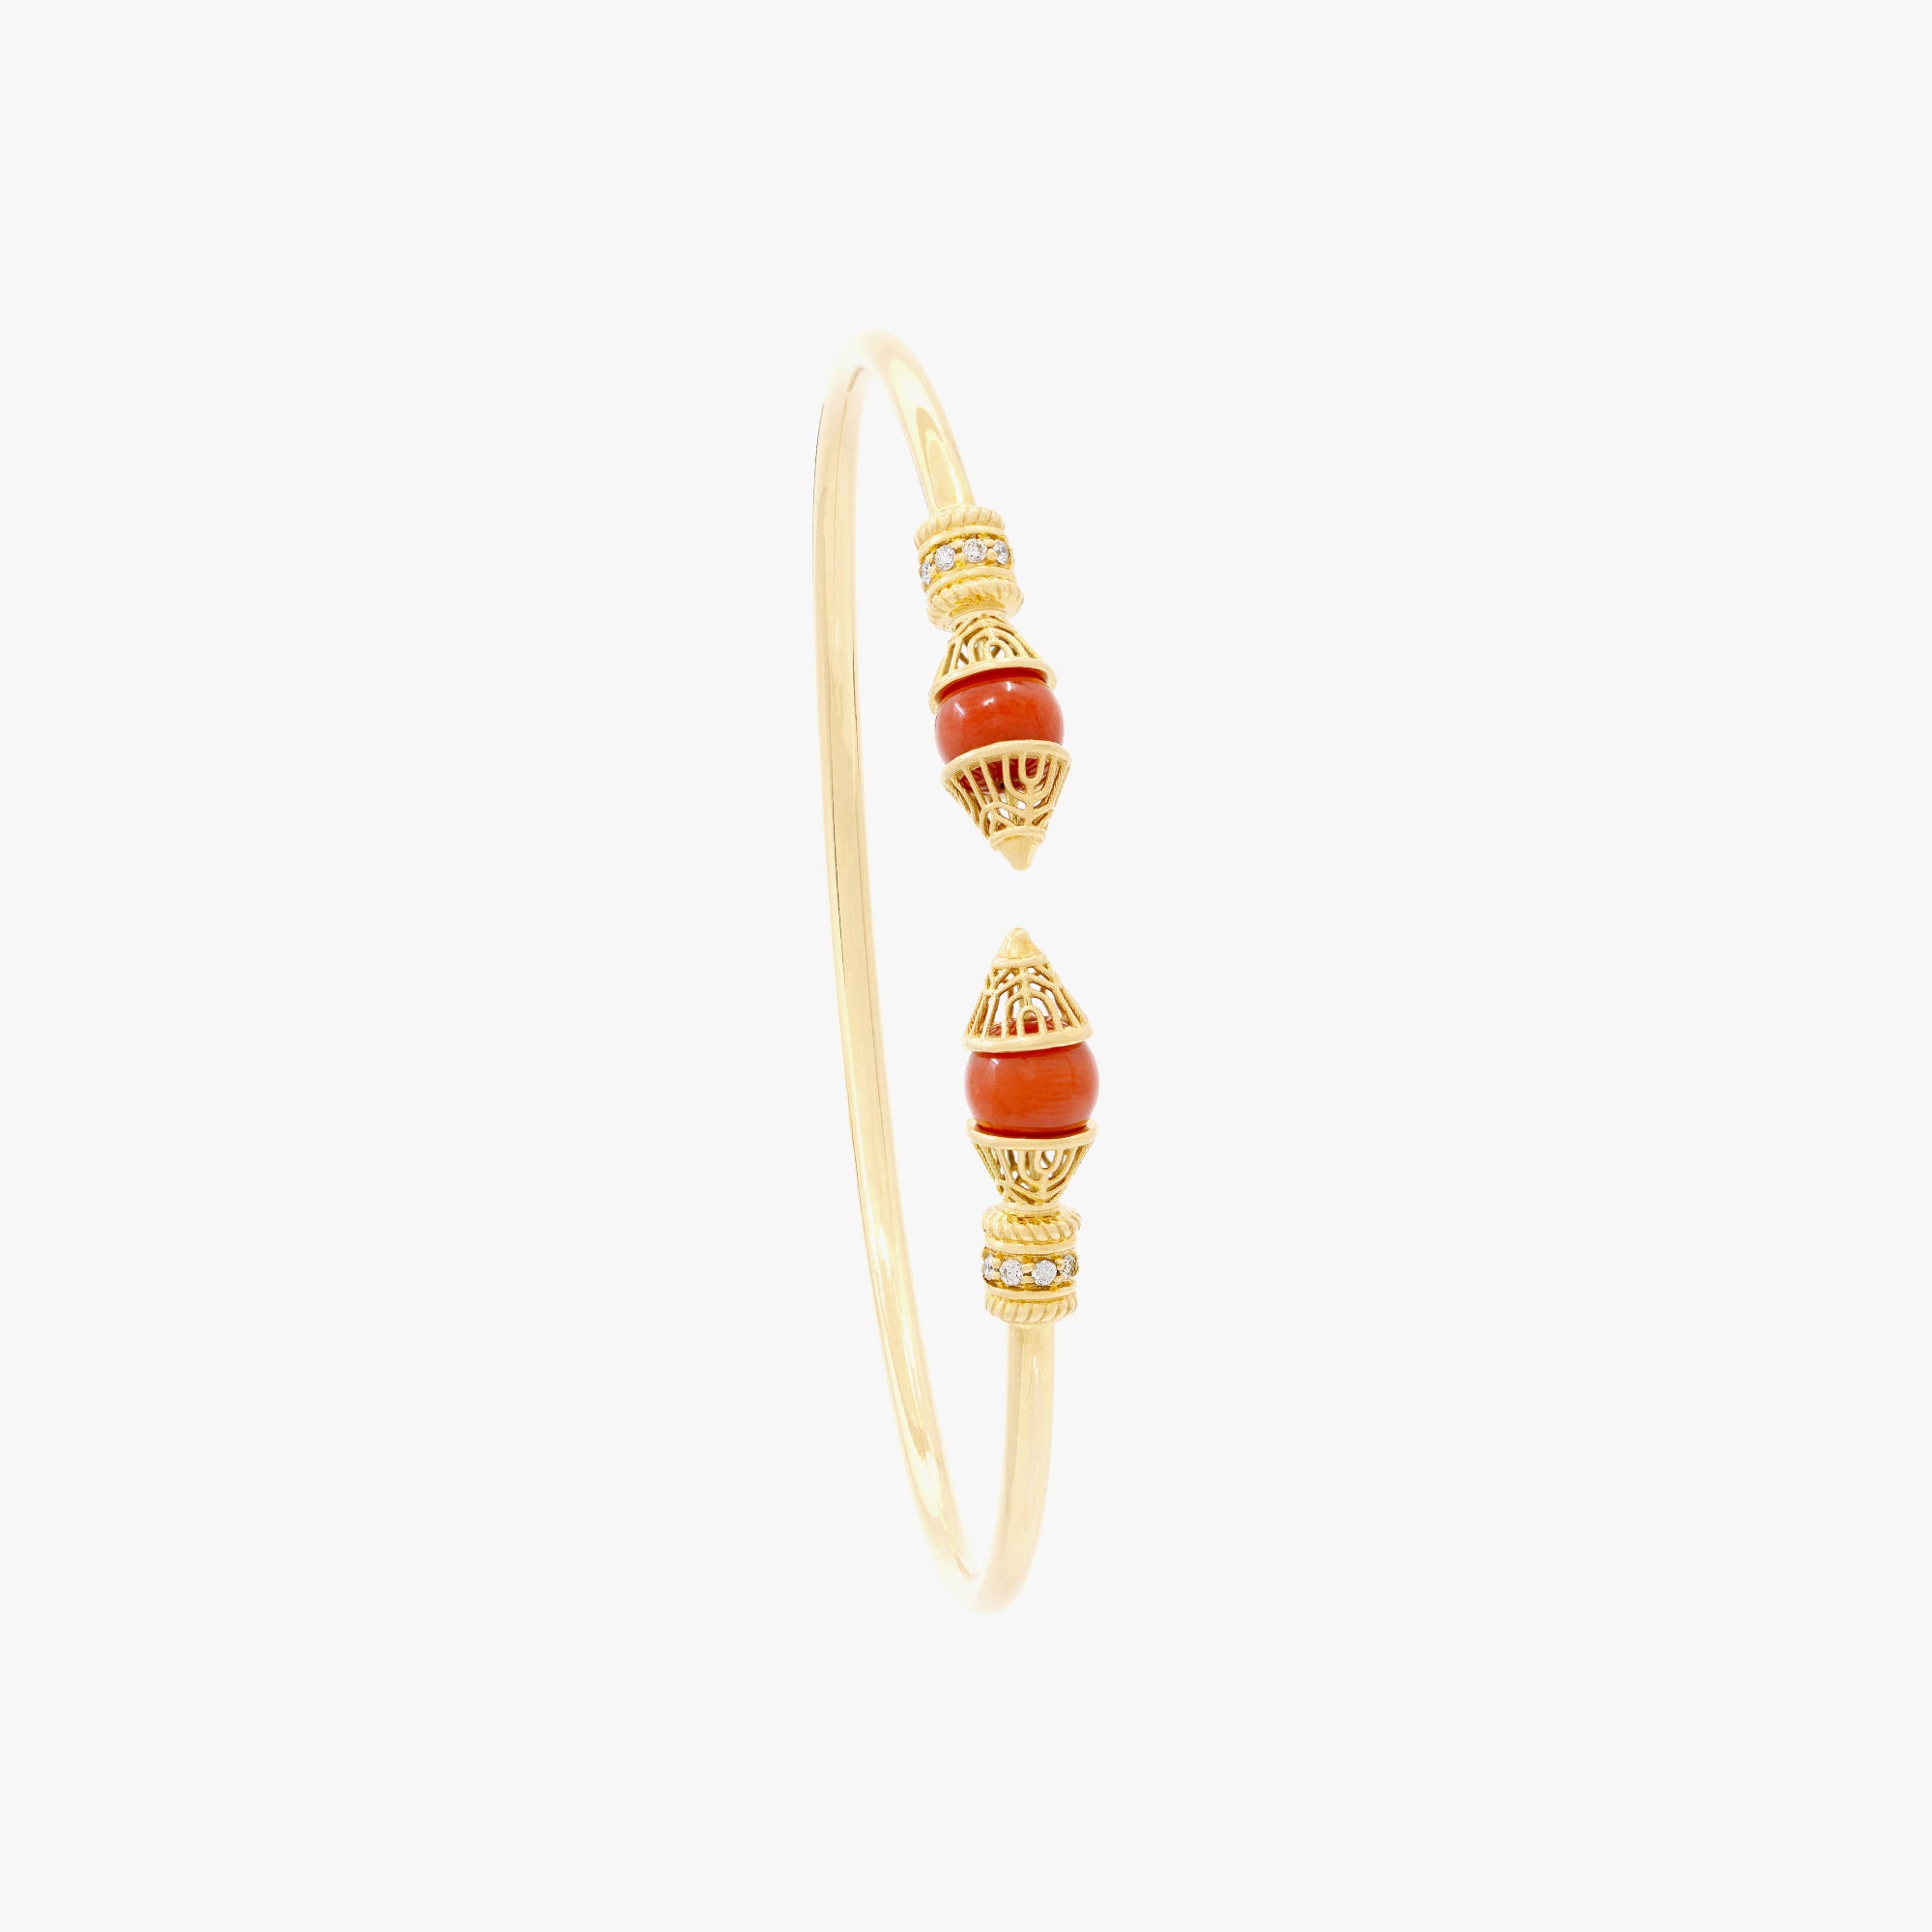 Al Merriyah Mood Colour Bangle in 18k Yellow gold with Coral and Diamonds